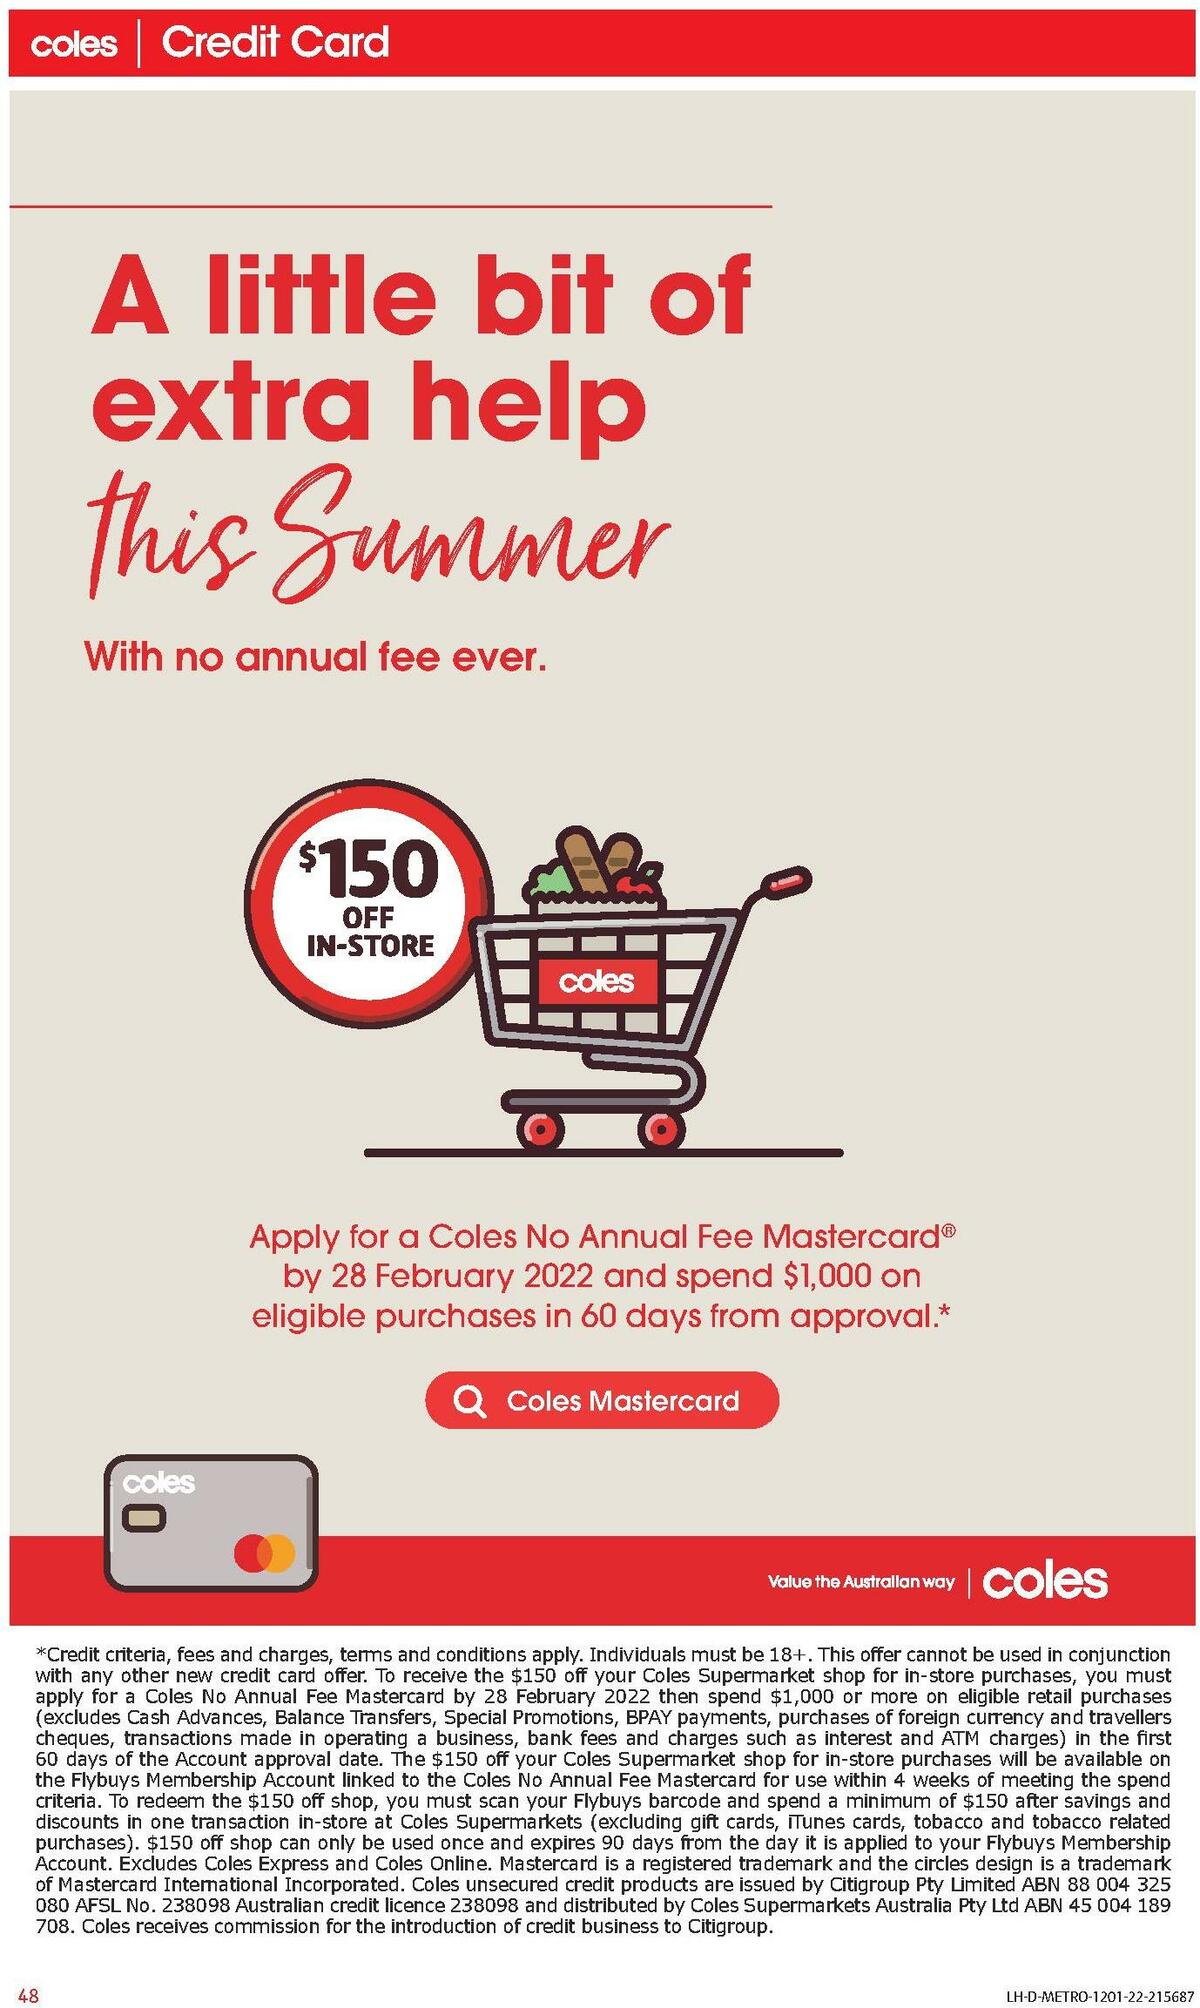 Coles Catalogues from 12 January